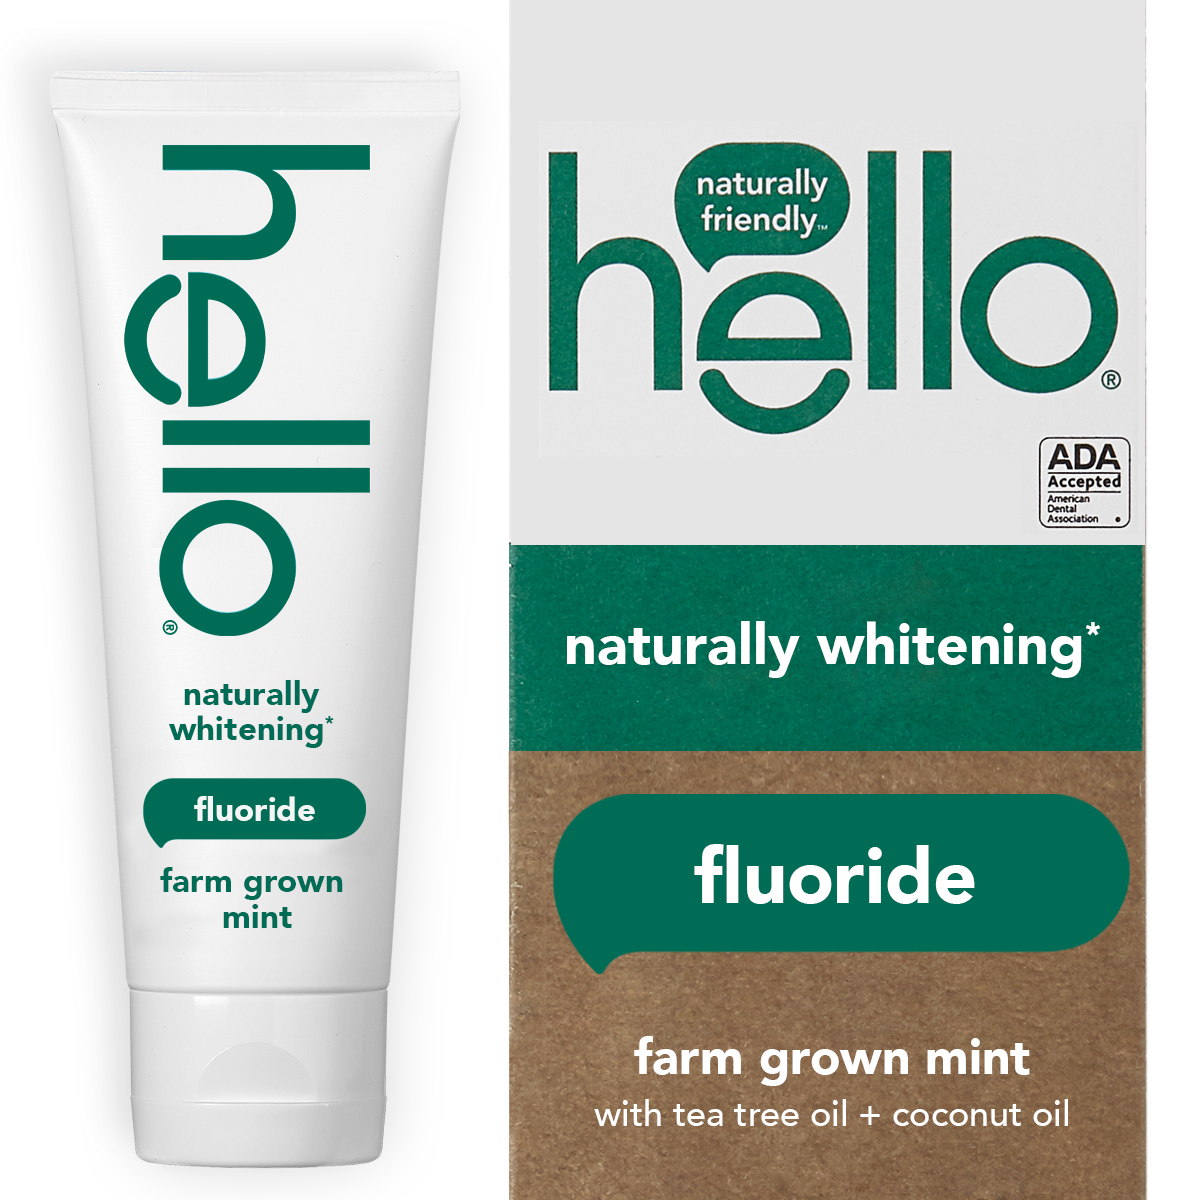 Hello Naturally Whitening Farm Mint with Tea Tree + Coconut Fluoride Toothpaste - image 1 of 7